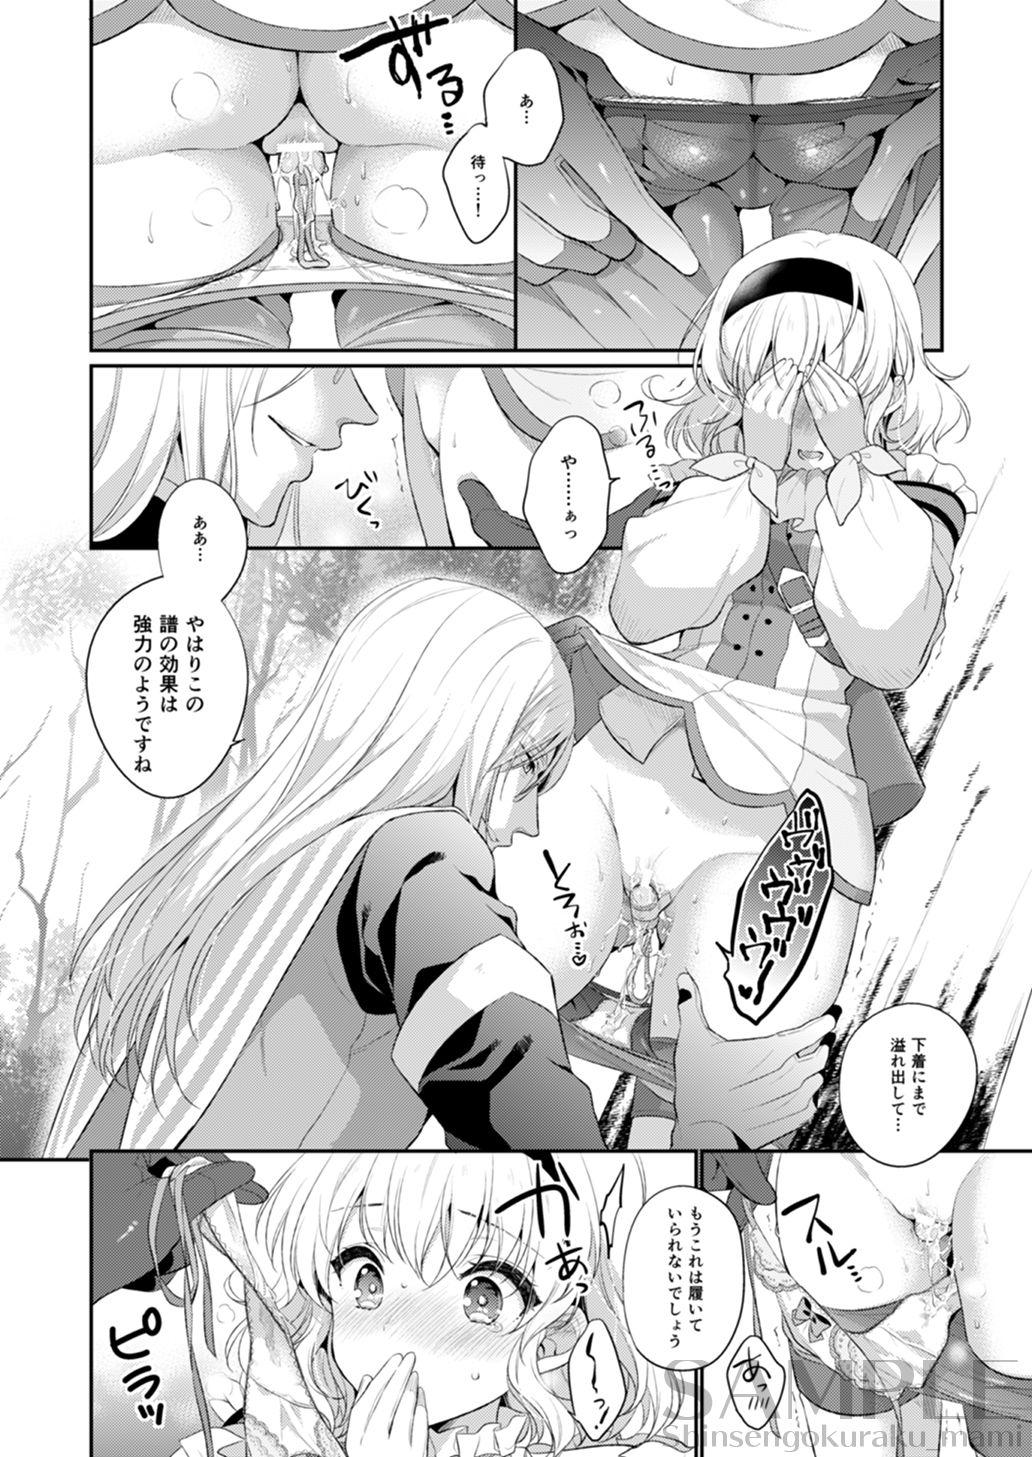 Latex dolcemente - Tales of the abyss Creamy - Page 11